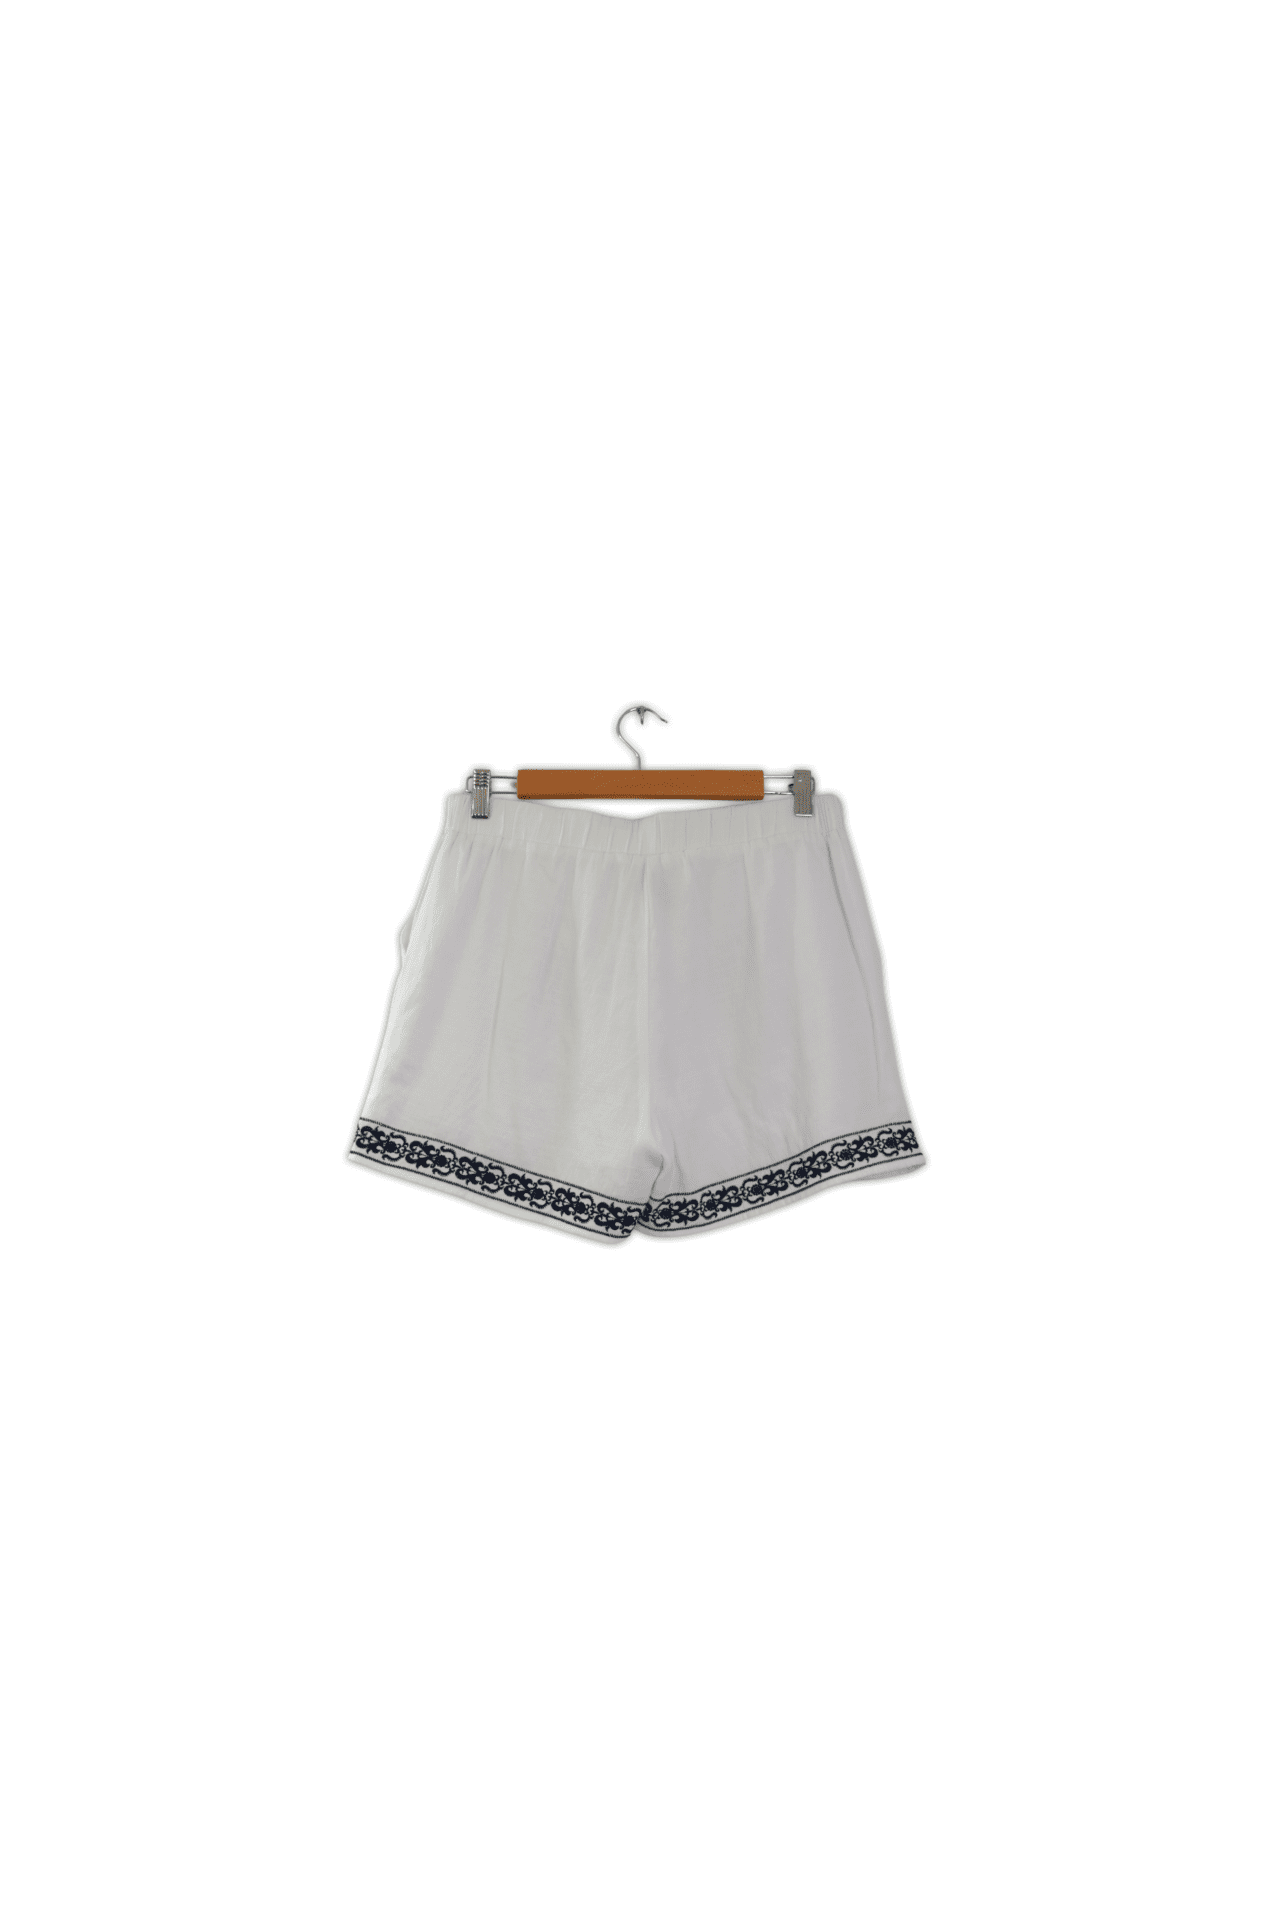 Lightweight summer shorts featuring floral embroidered patterns on the front and along the hemline. The shorts are also a medium size with an elastic waist band.